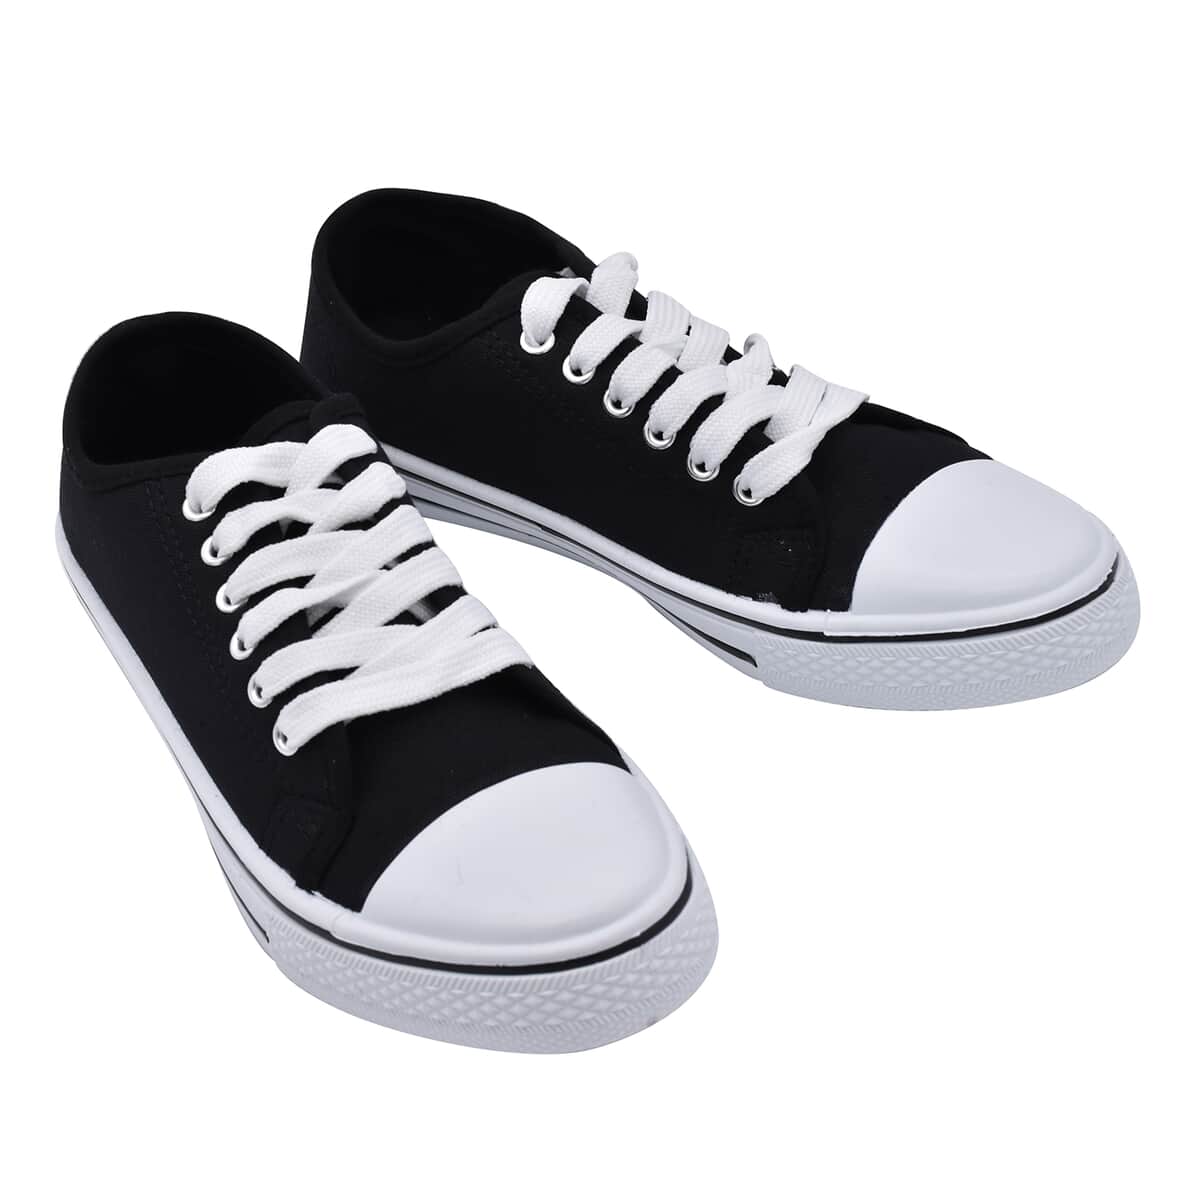 Black Star Canvas Lace Up Shoes - Size 5 (US) image number 1